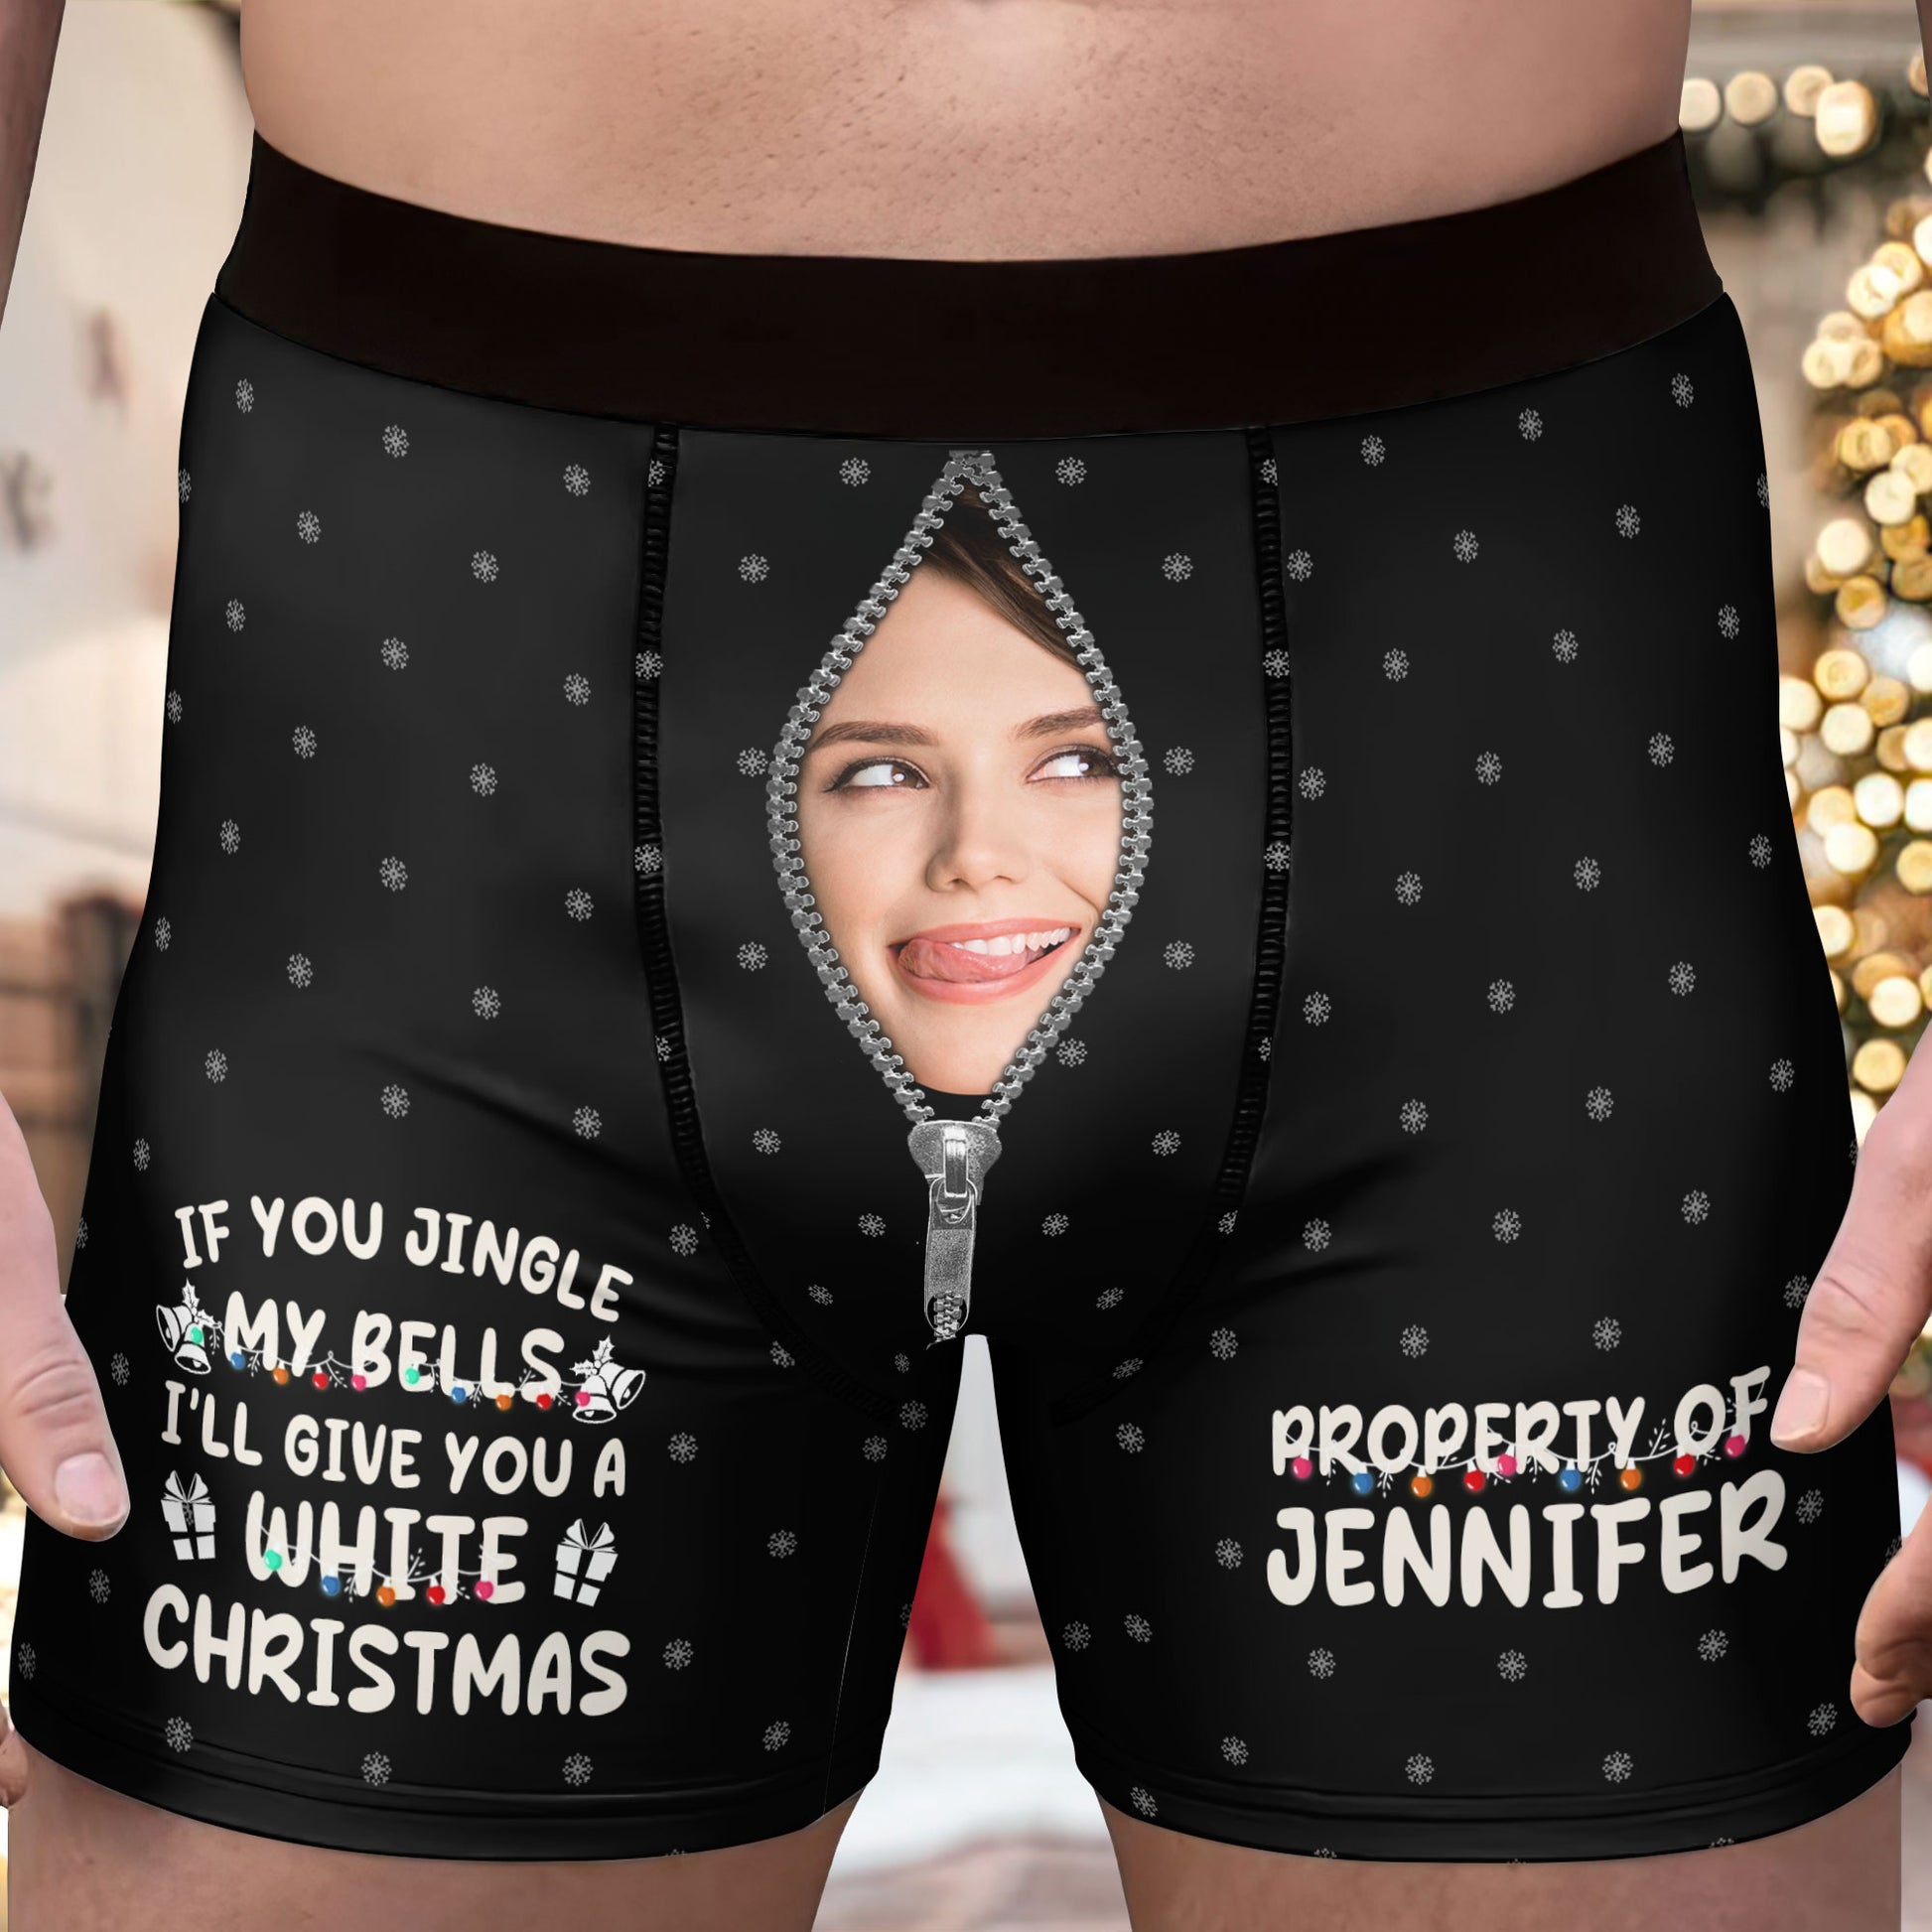 My Face on Custom Underwear Personalized Men's Boxers with Face Valentine's  Day 